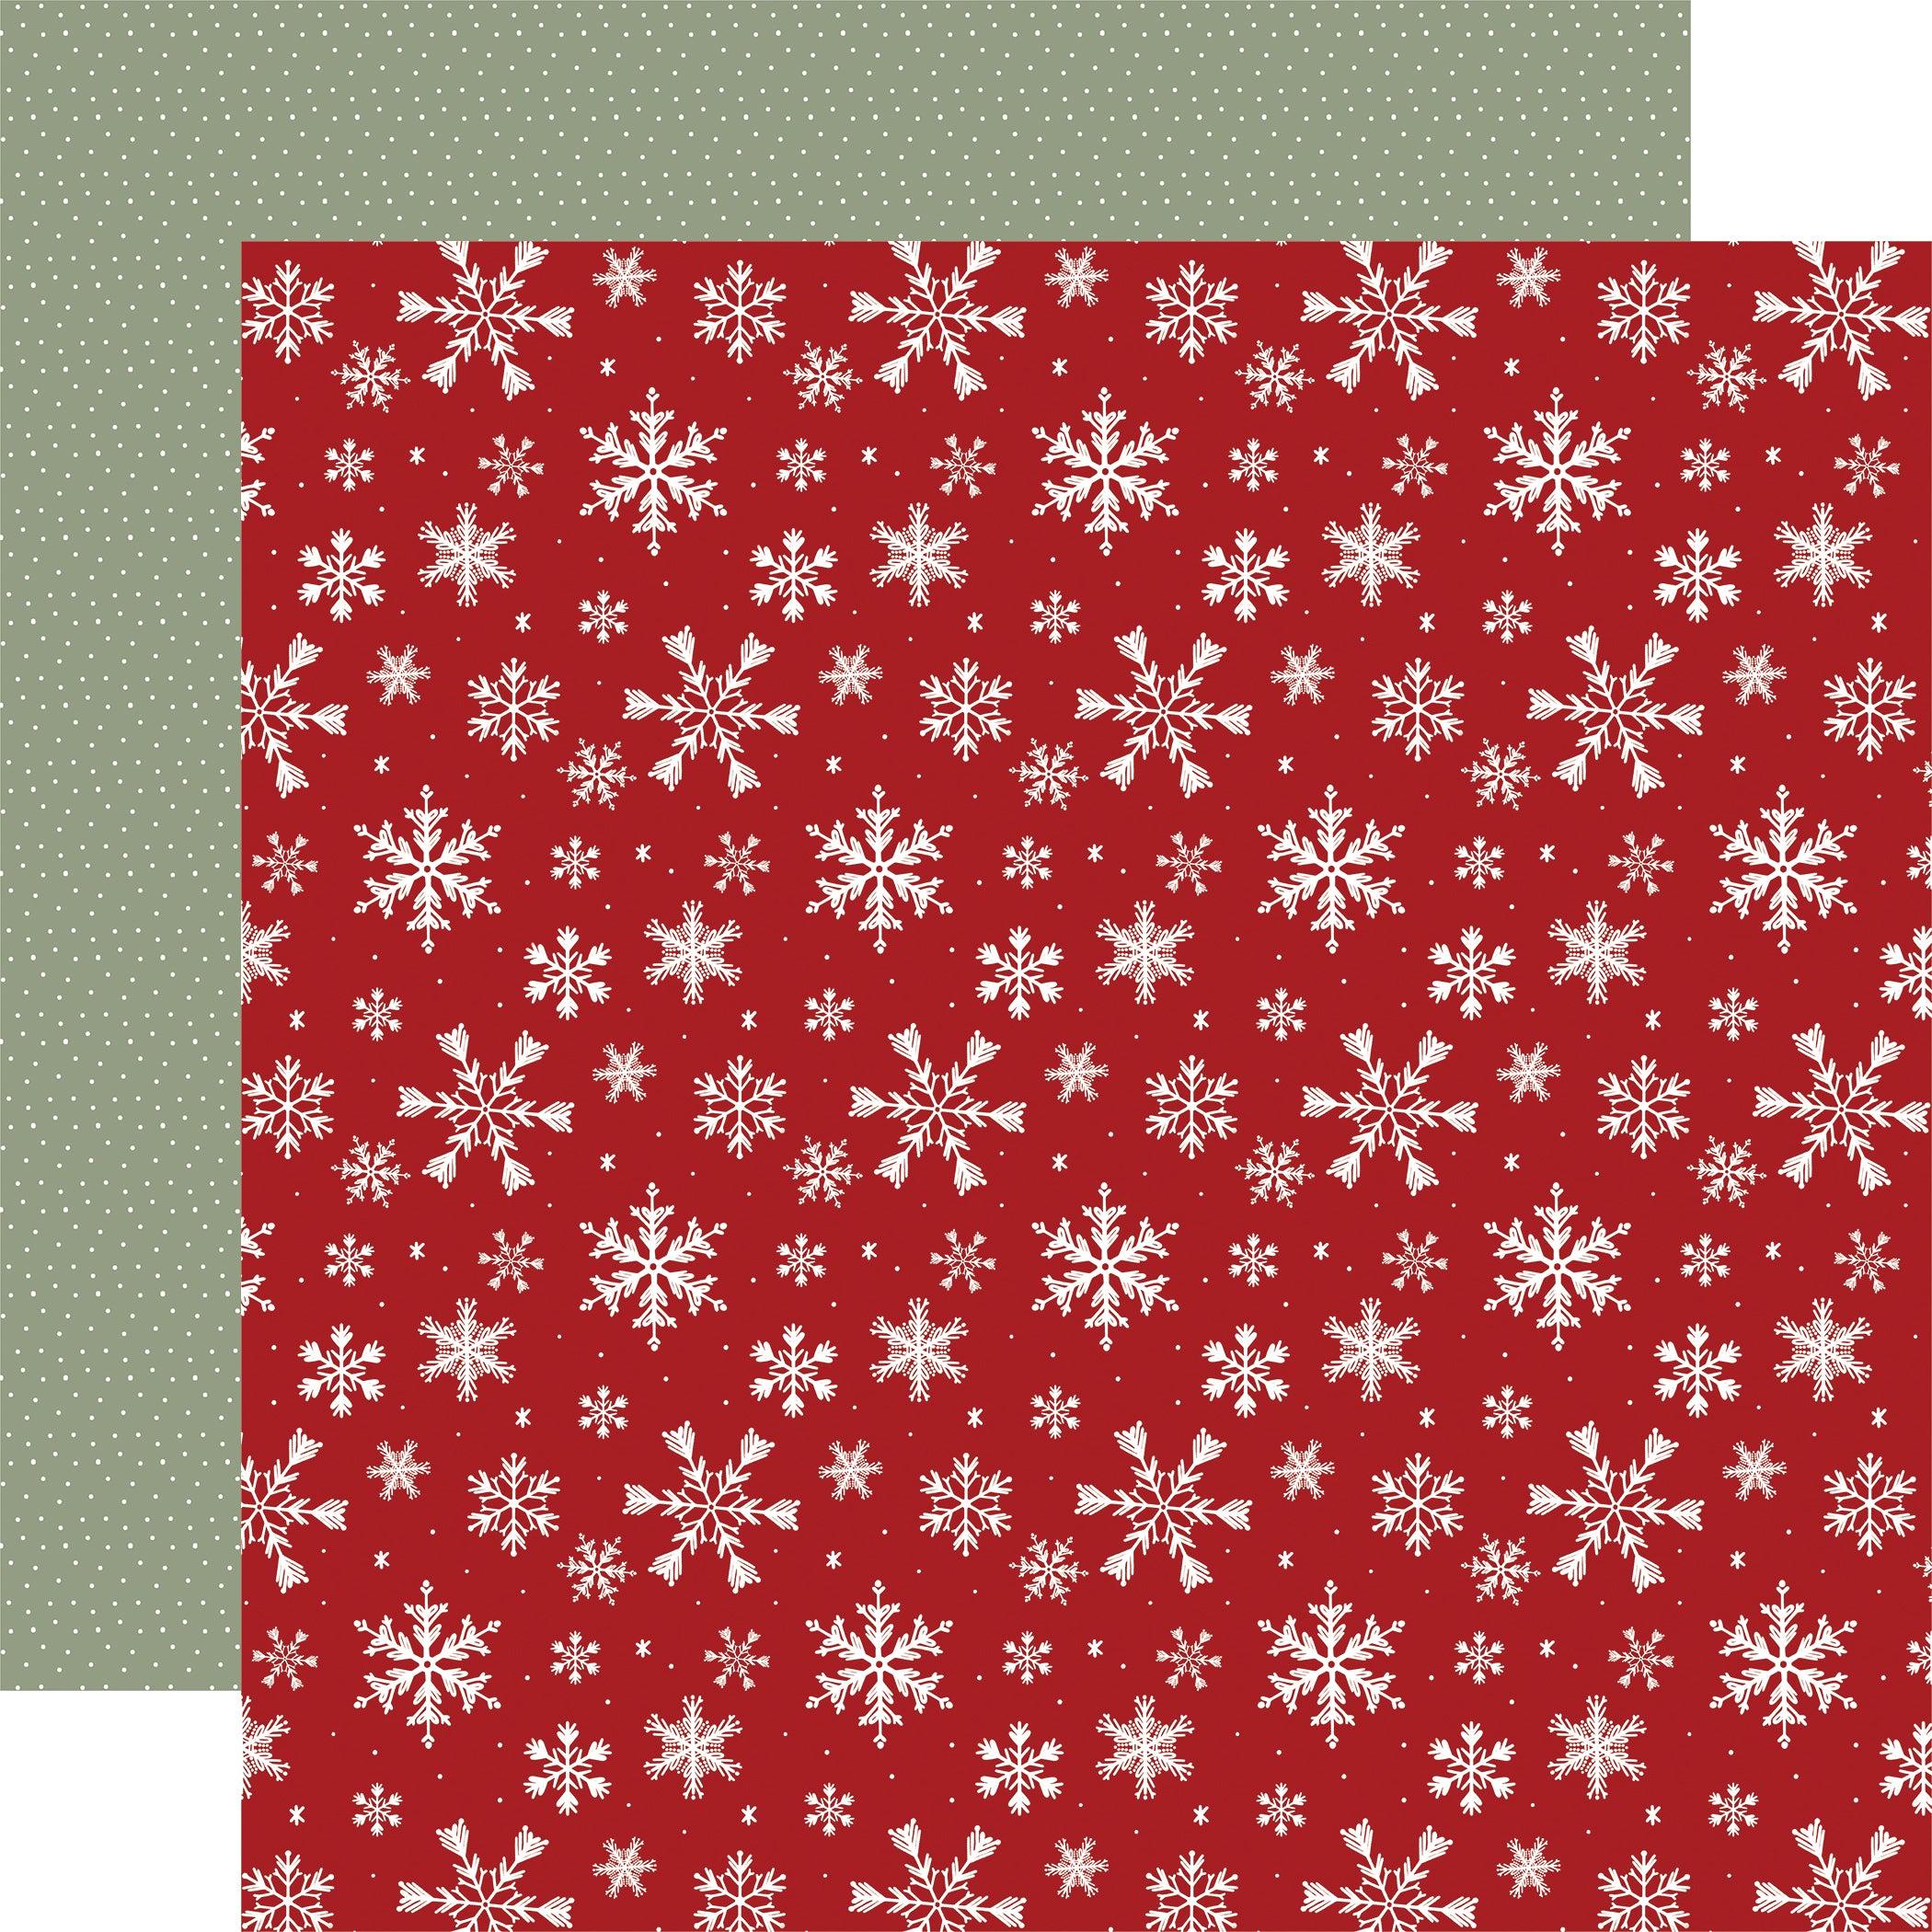 A Wonderful Christmas Collection Holiday Cheer Snow 12 x 12 Double-Sided Scrapbook Paper by Carta Bella - Scrapbook Supply Companies